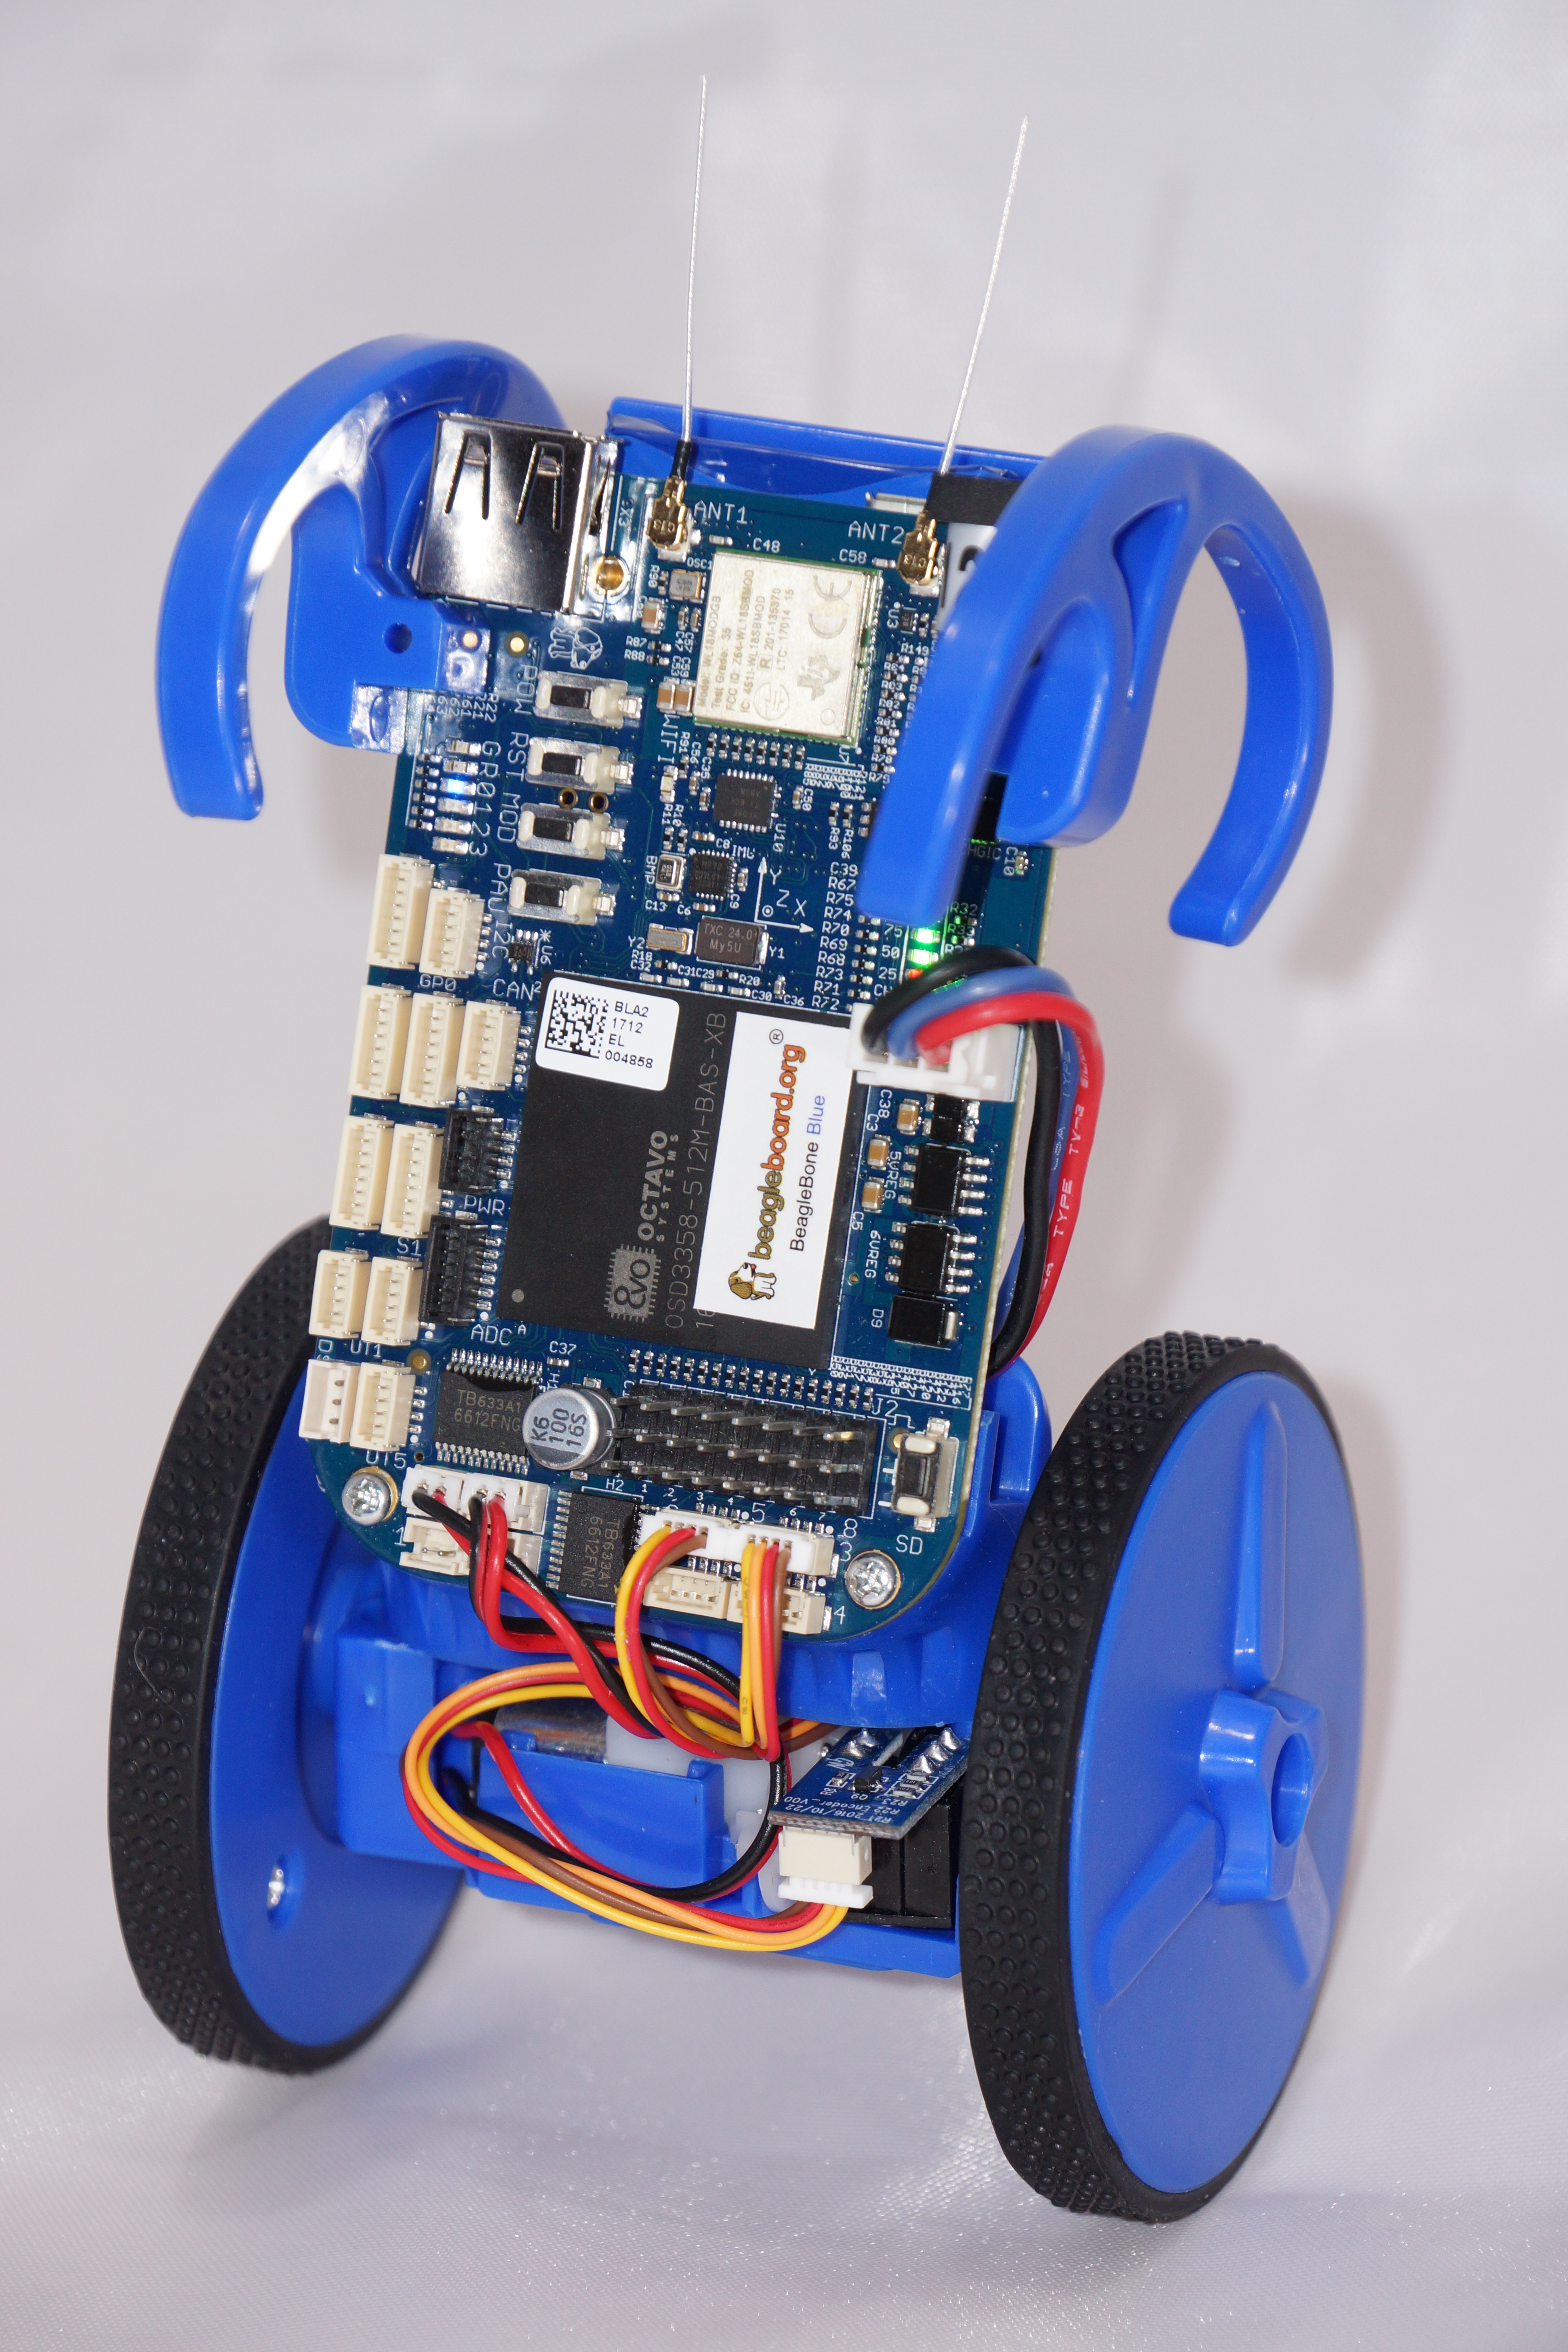 BeagleBone Blue and the criticality of robotics in education